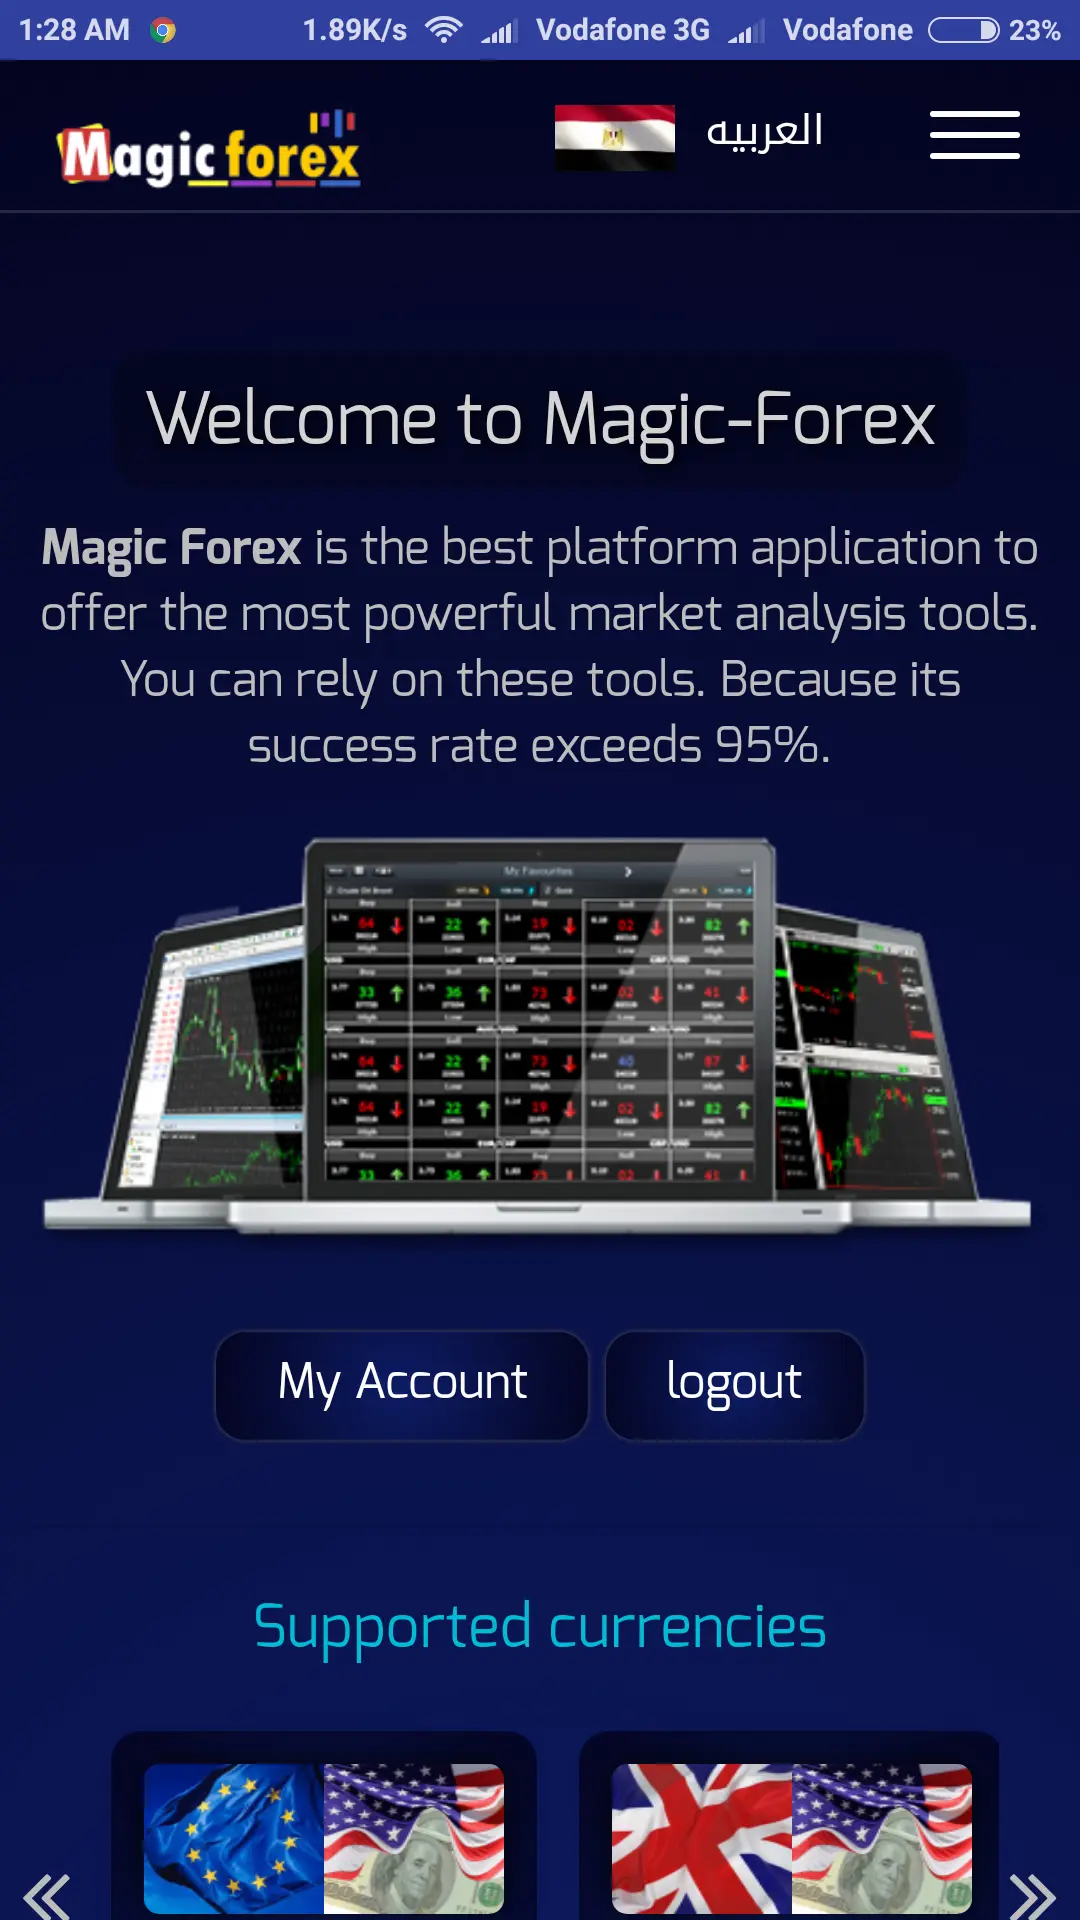 Magic Forex Application for Forex Signals